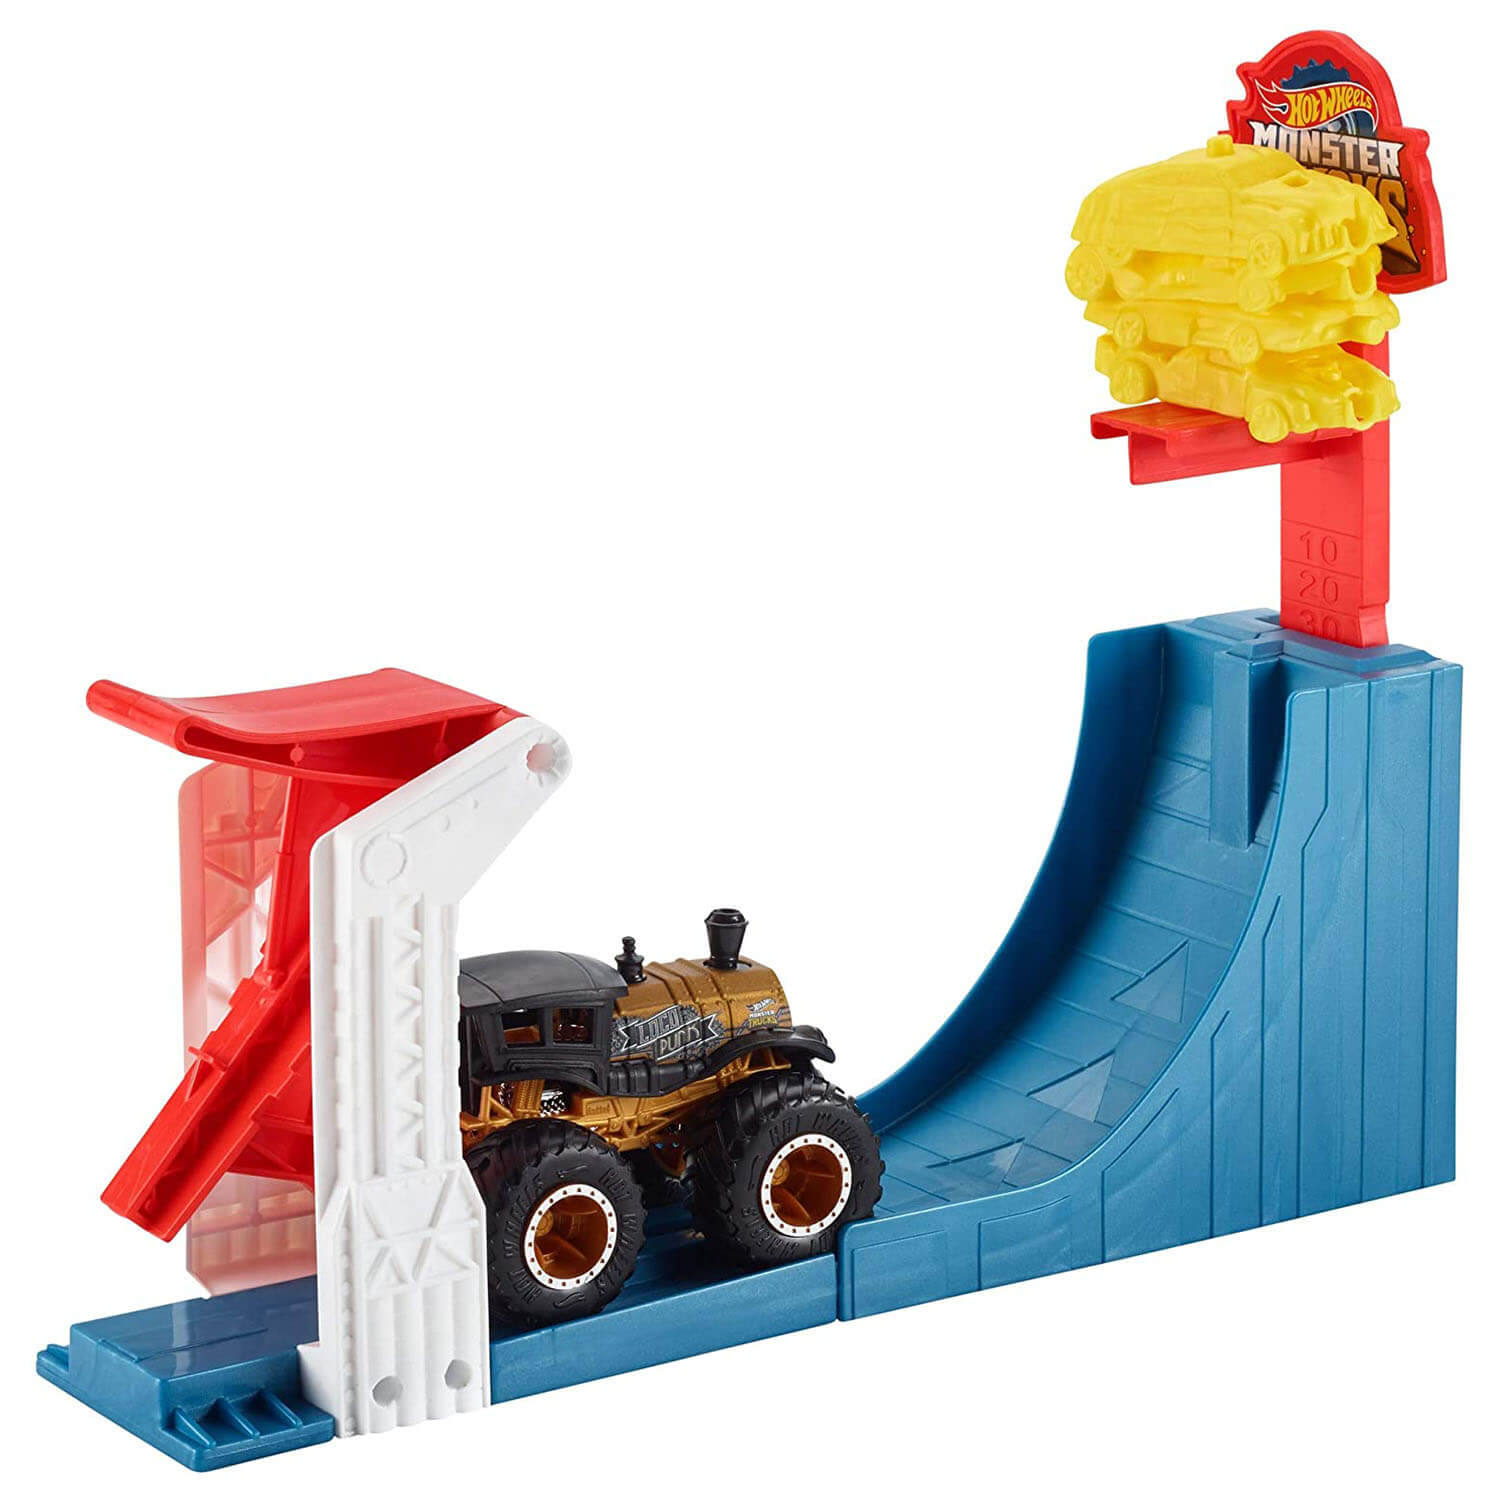 Side view of the monster truck playset.